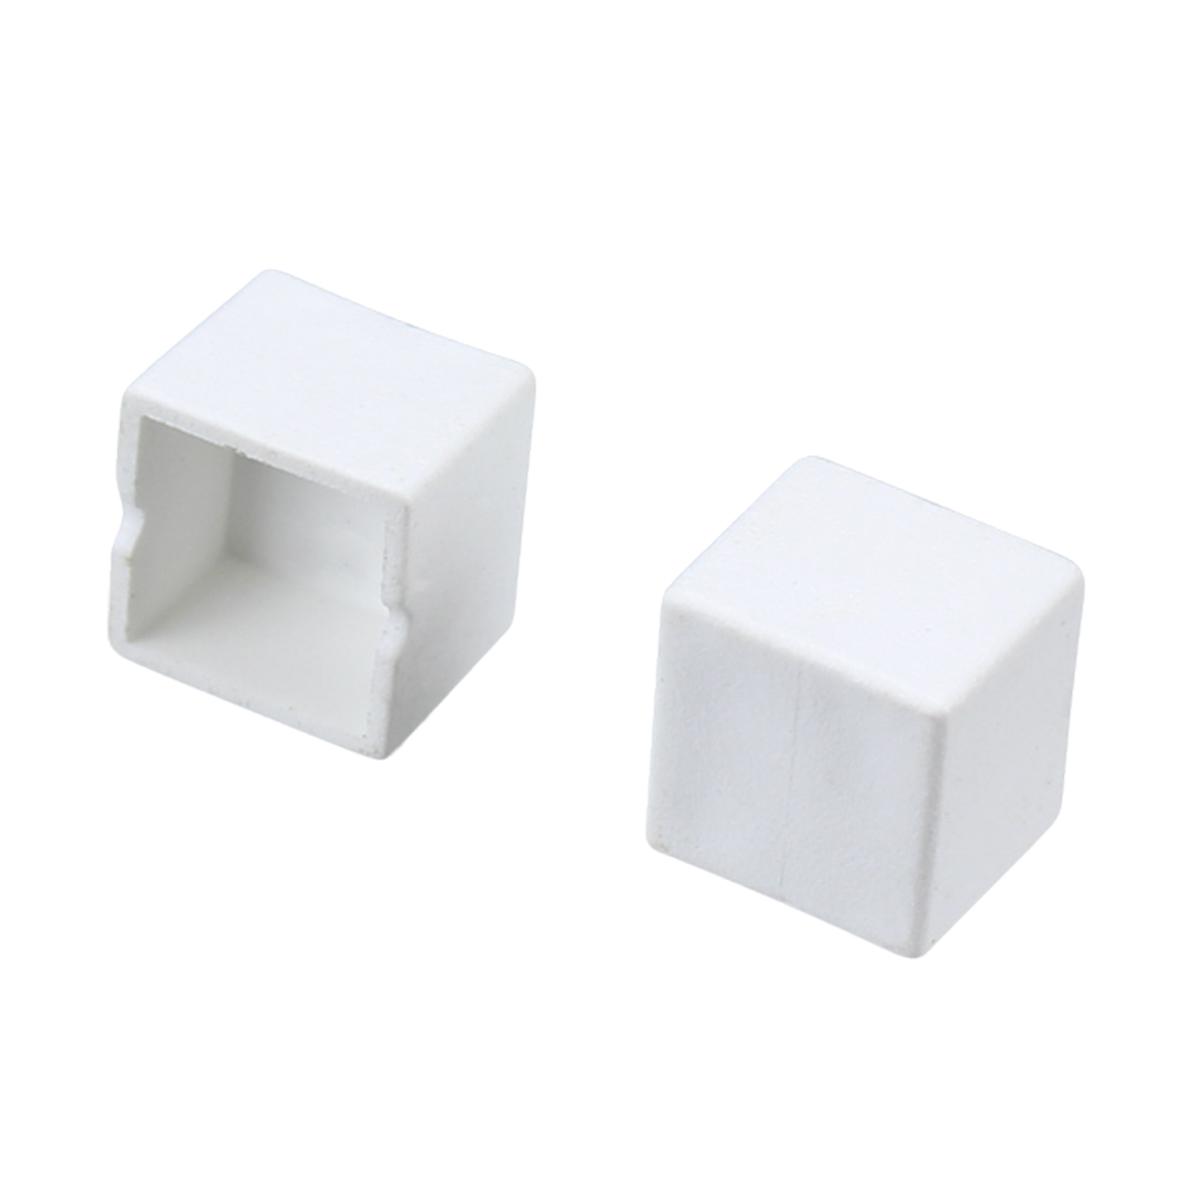 Microlux End Caps, Pack of 10